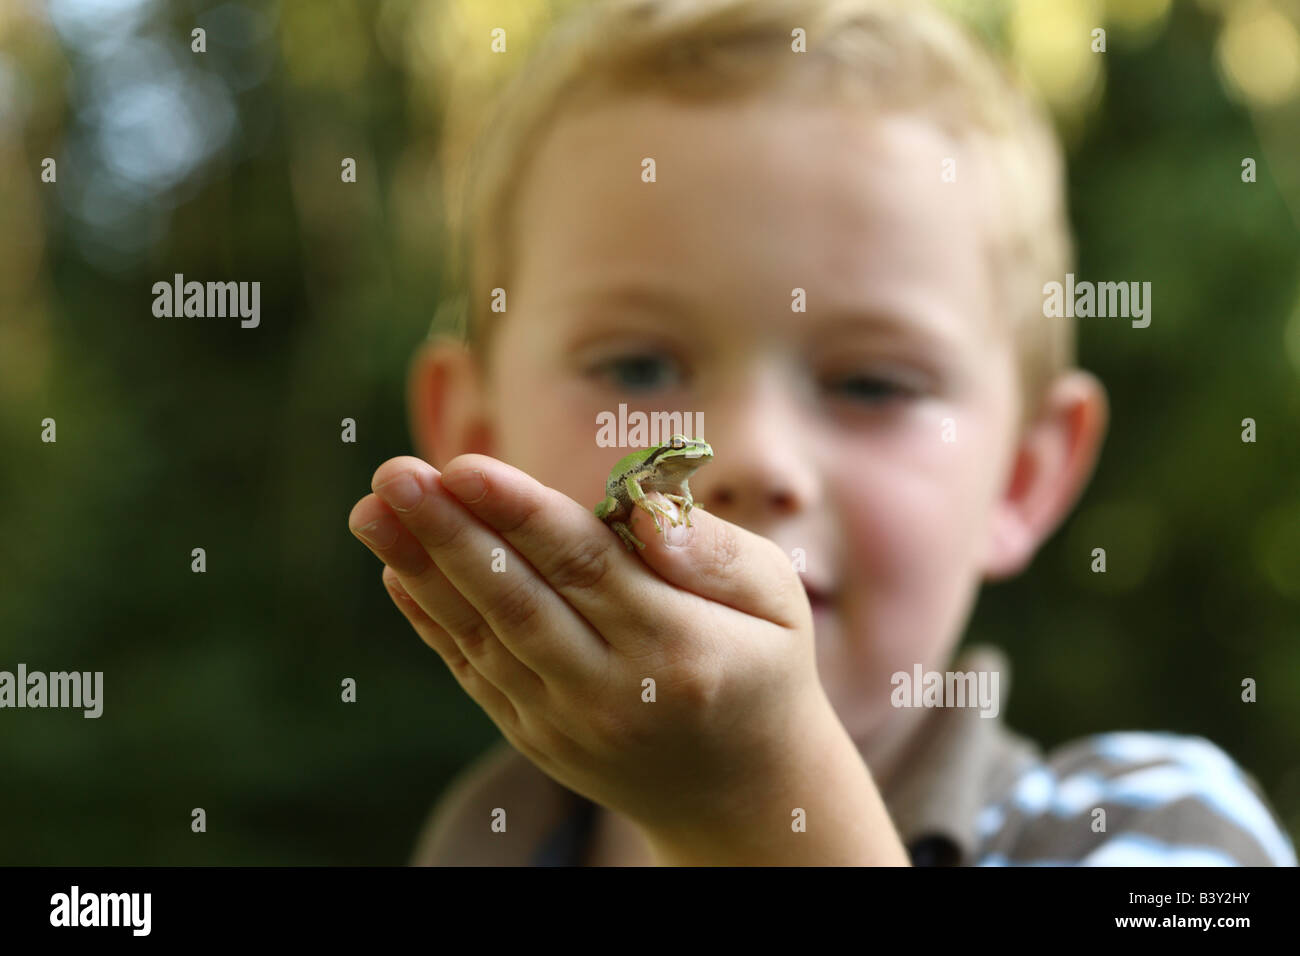 Young boy holding small tree frog Stock Photo